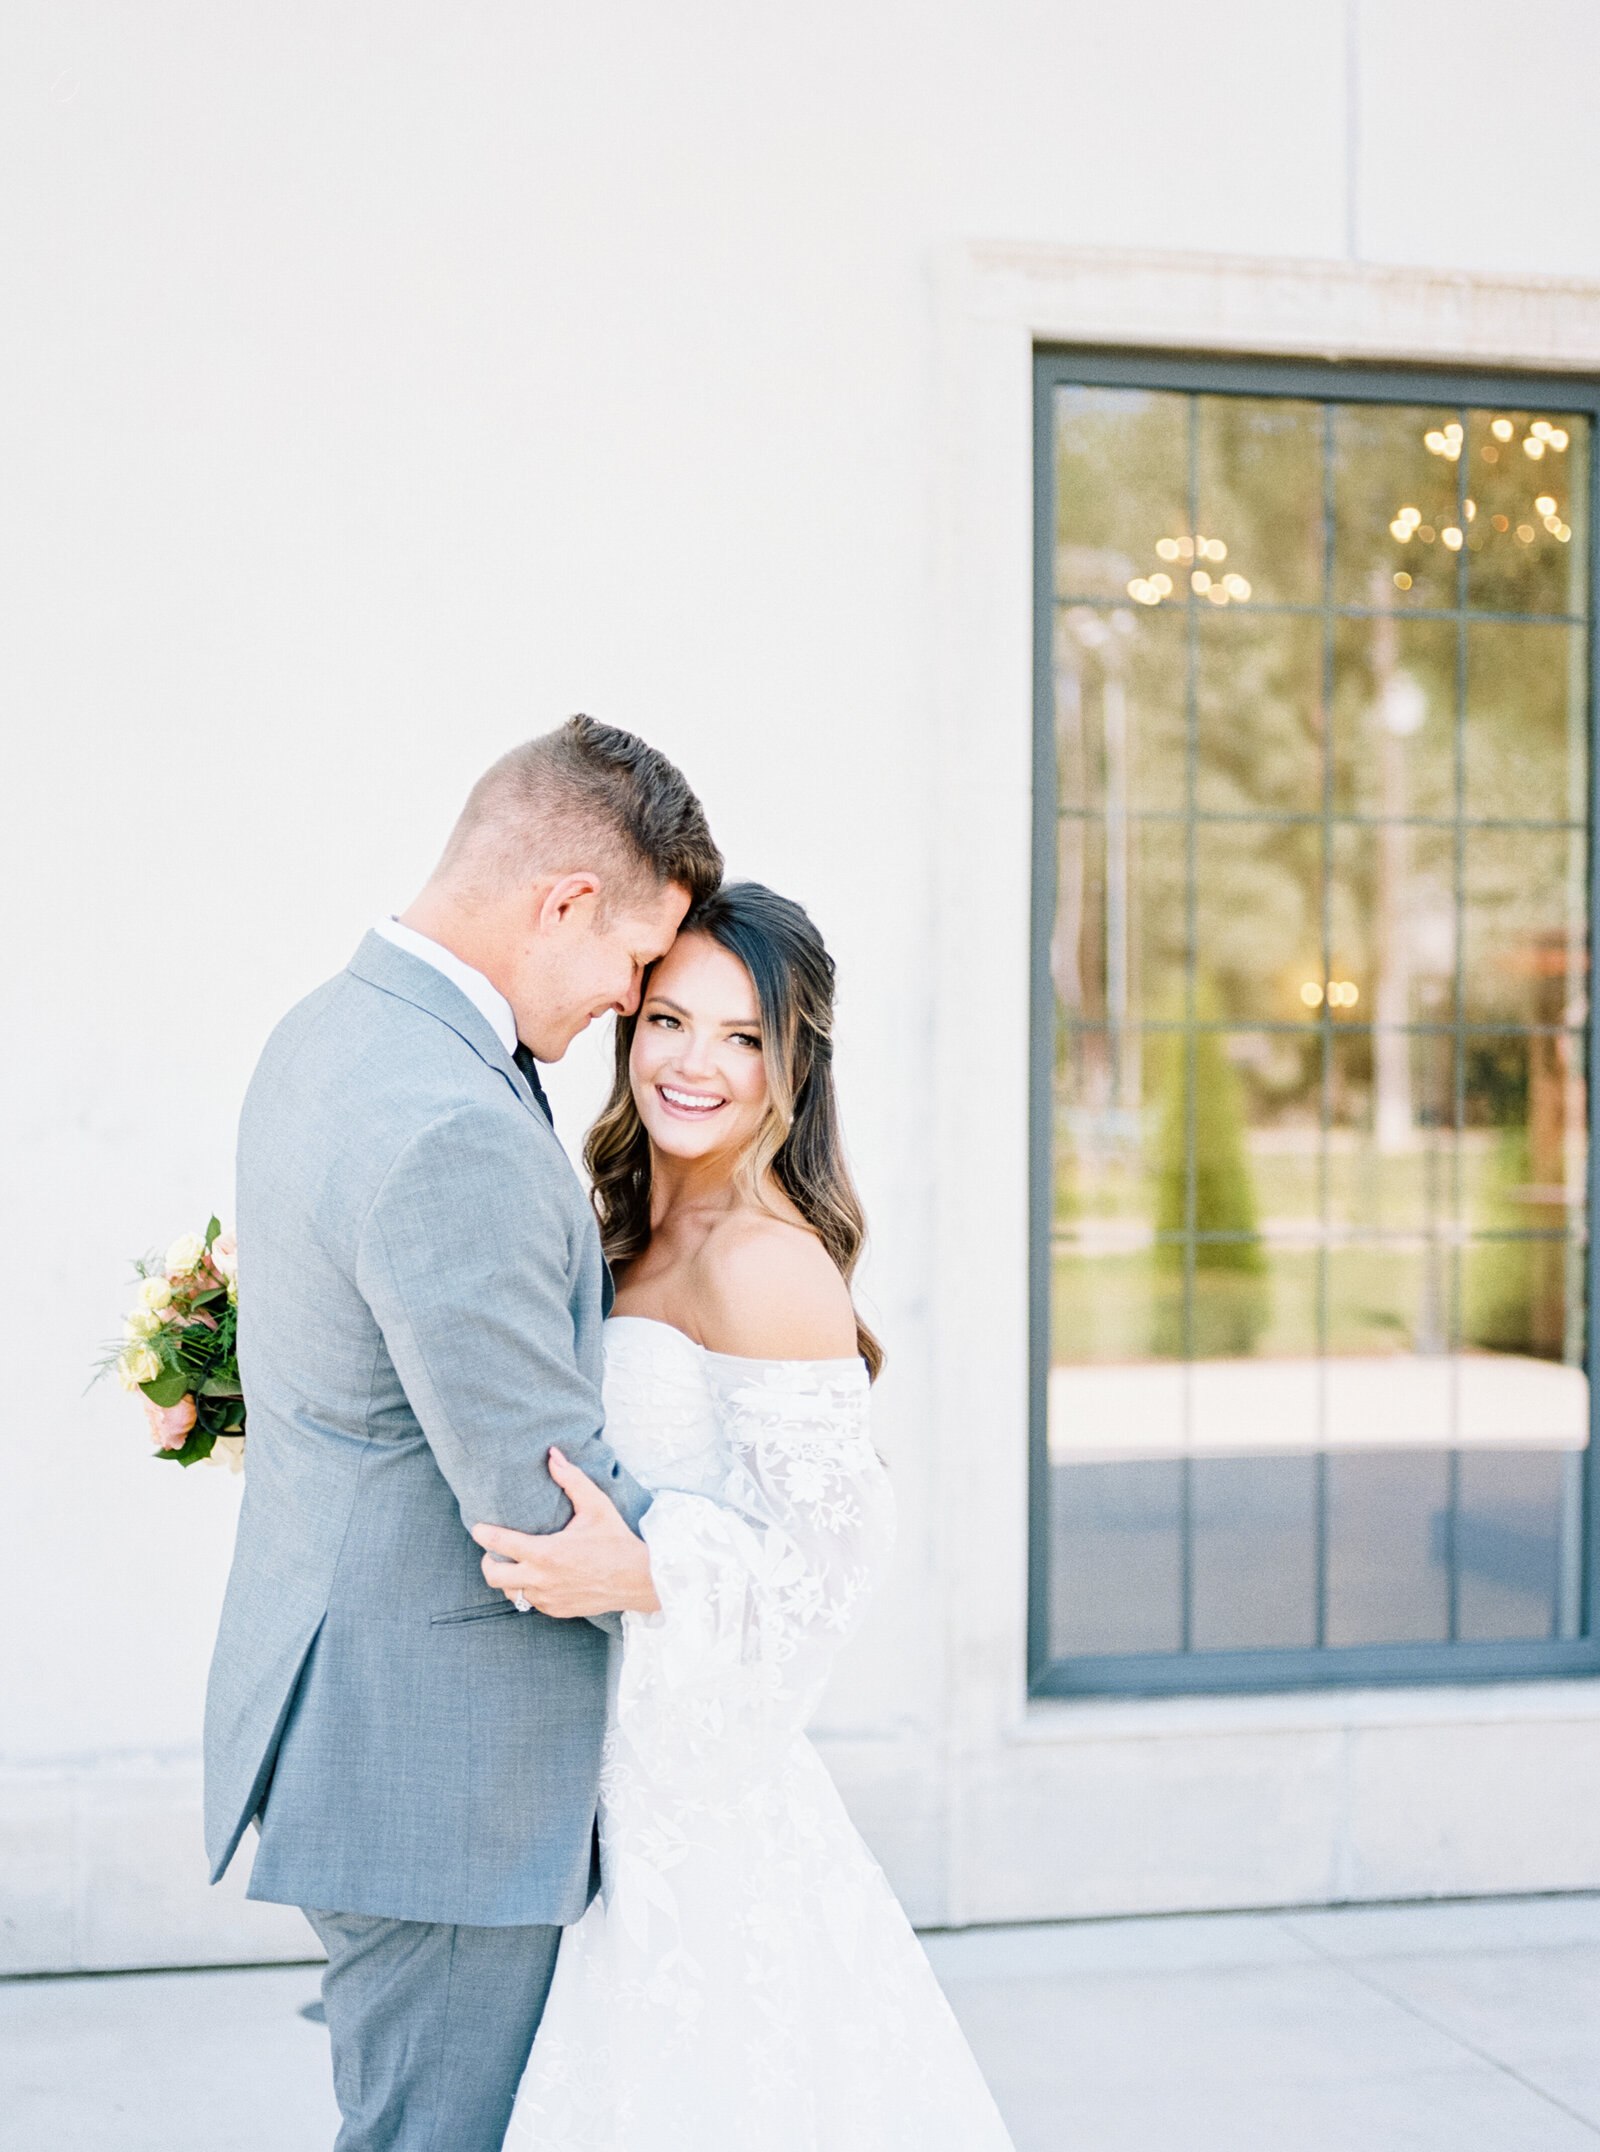 Chateau Des Fleurs Wedding Couples portraits with bride and groom next to white stucco building